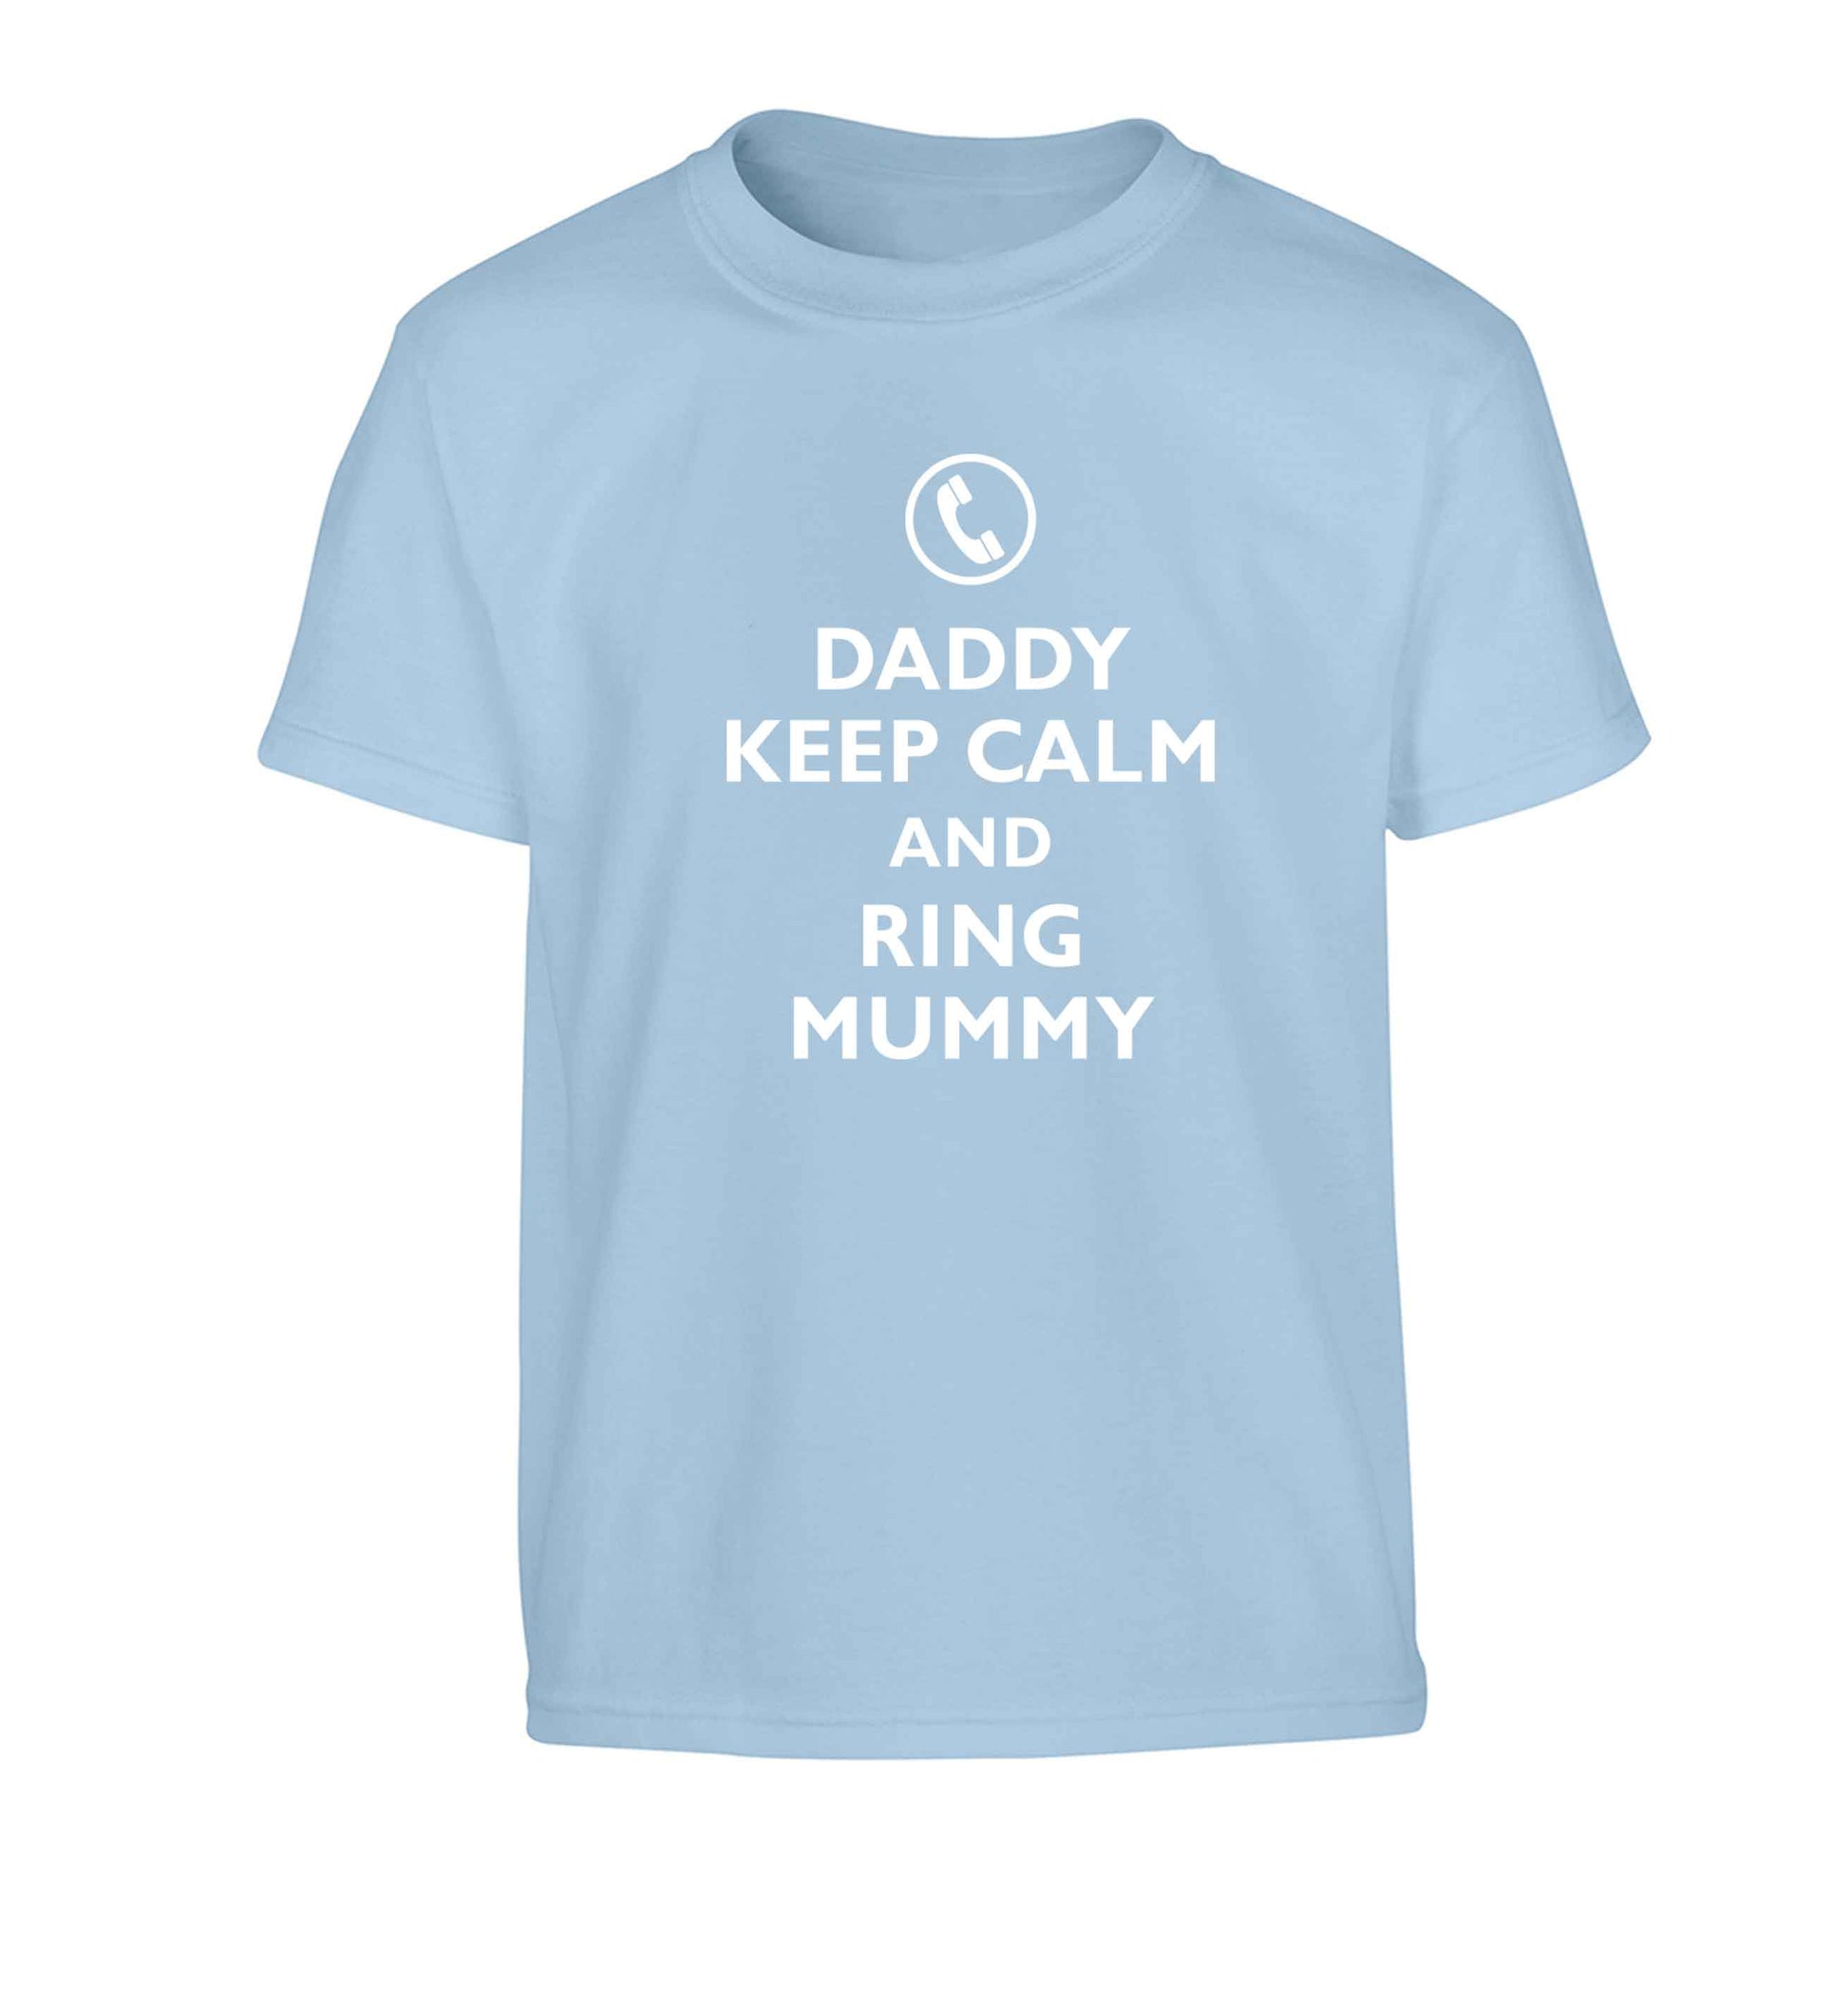 Daddy keep calm and ring mummy Children's light blue Tshirt 12-13 Years